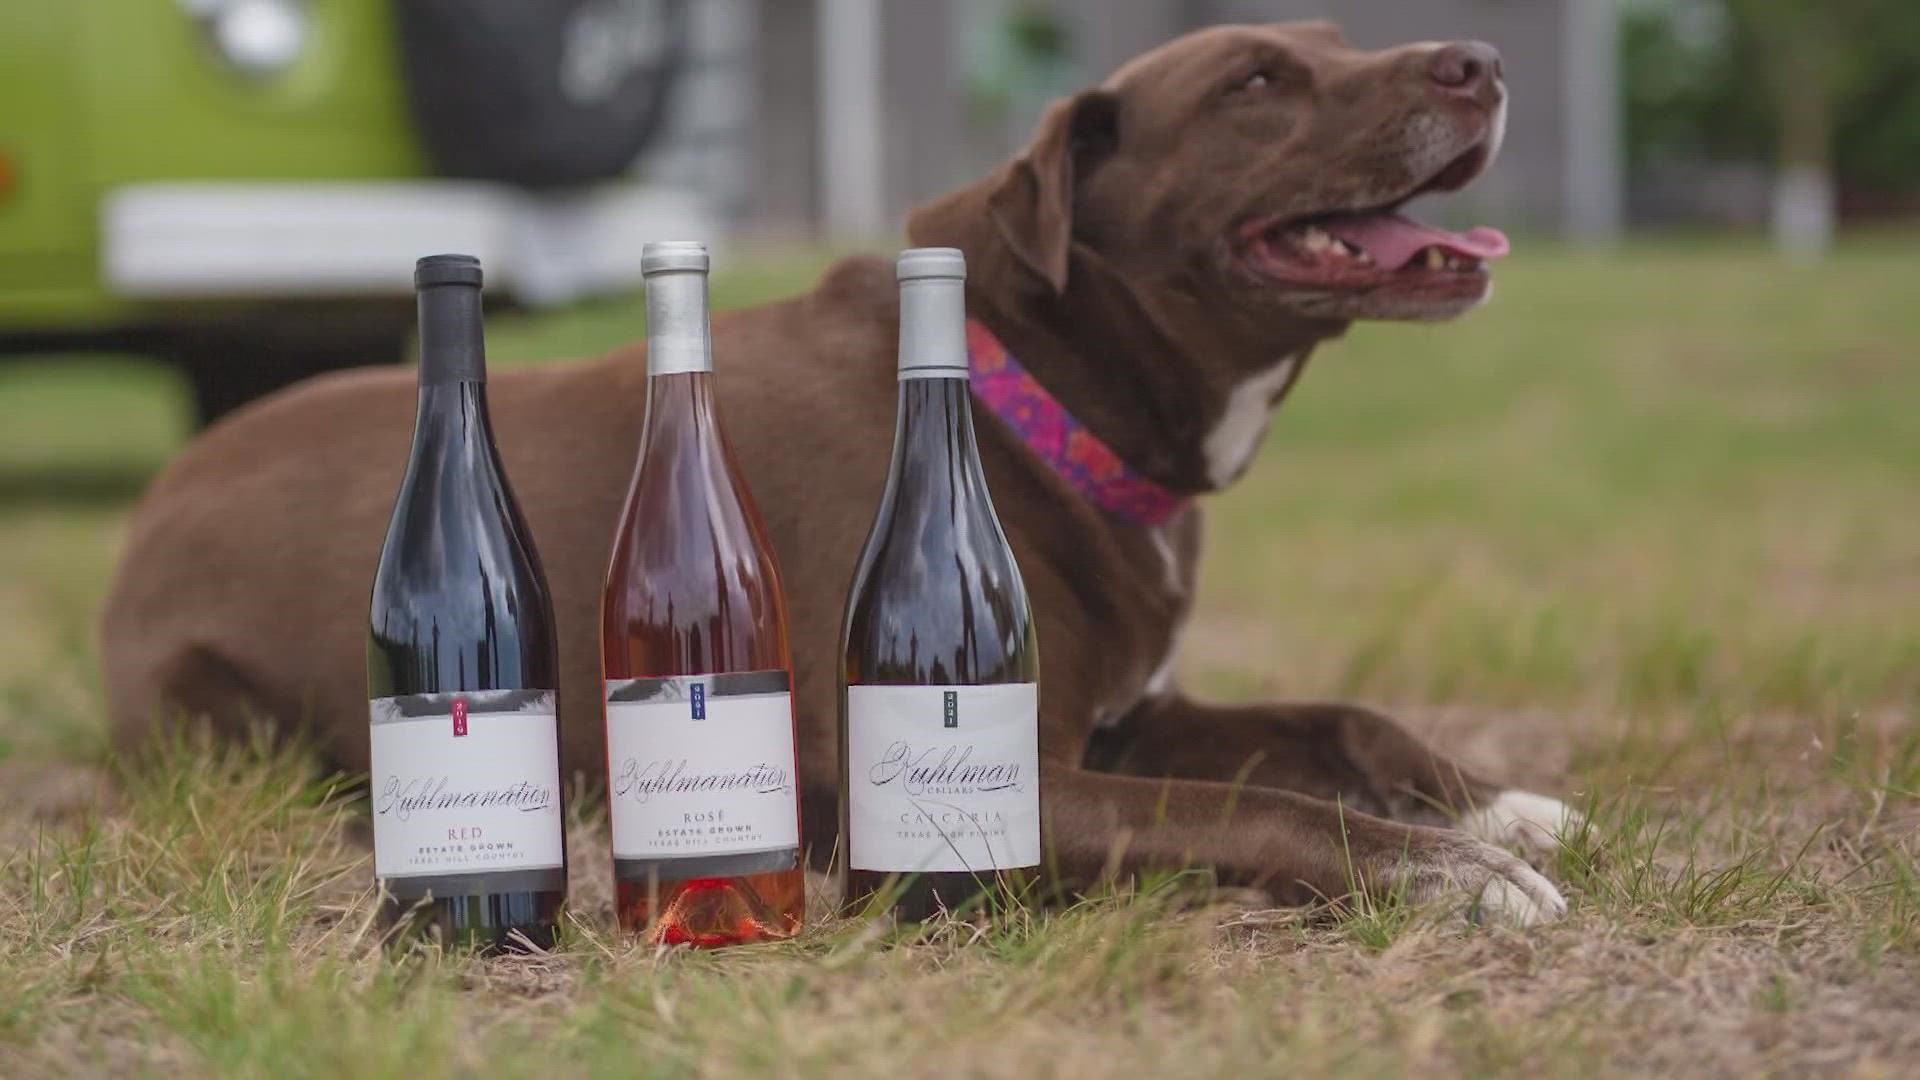 Kuhlman Cellars is making a donation from each bottle sold to a local animal rescue organization, and they'll have "Barkuterie Boards" for the canines in attendance.